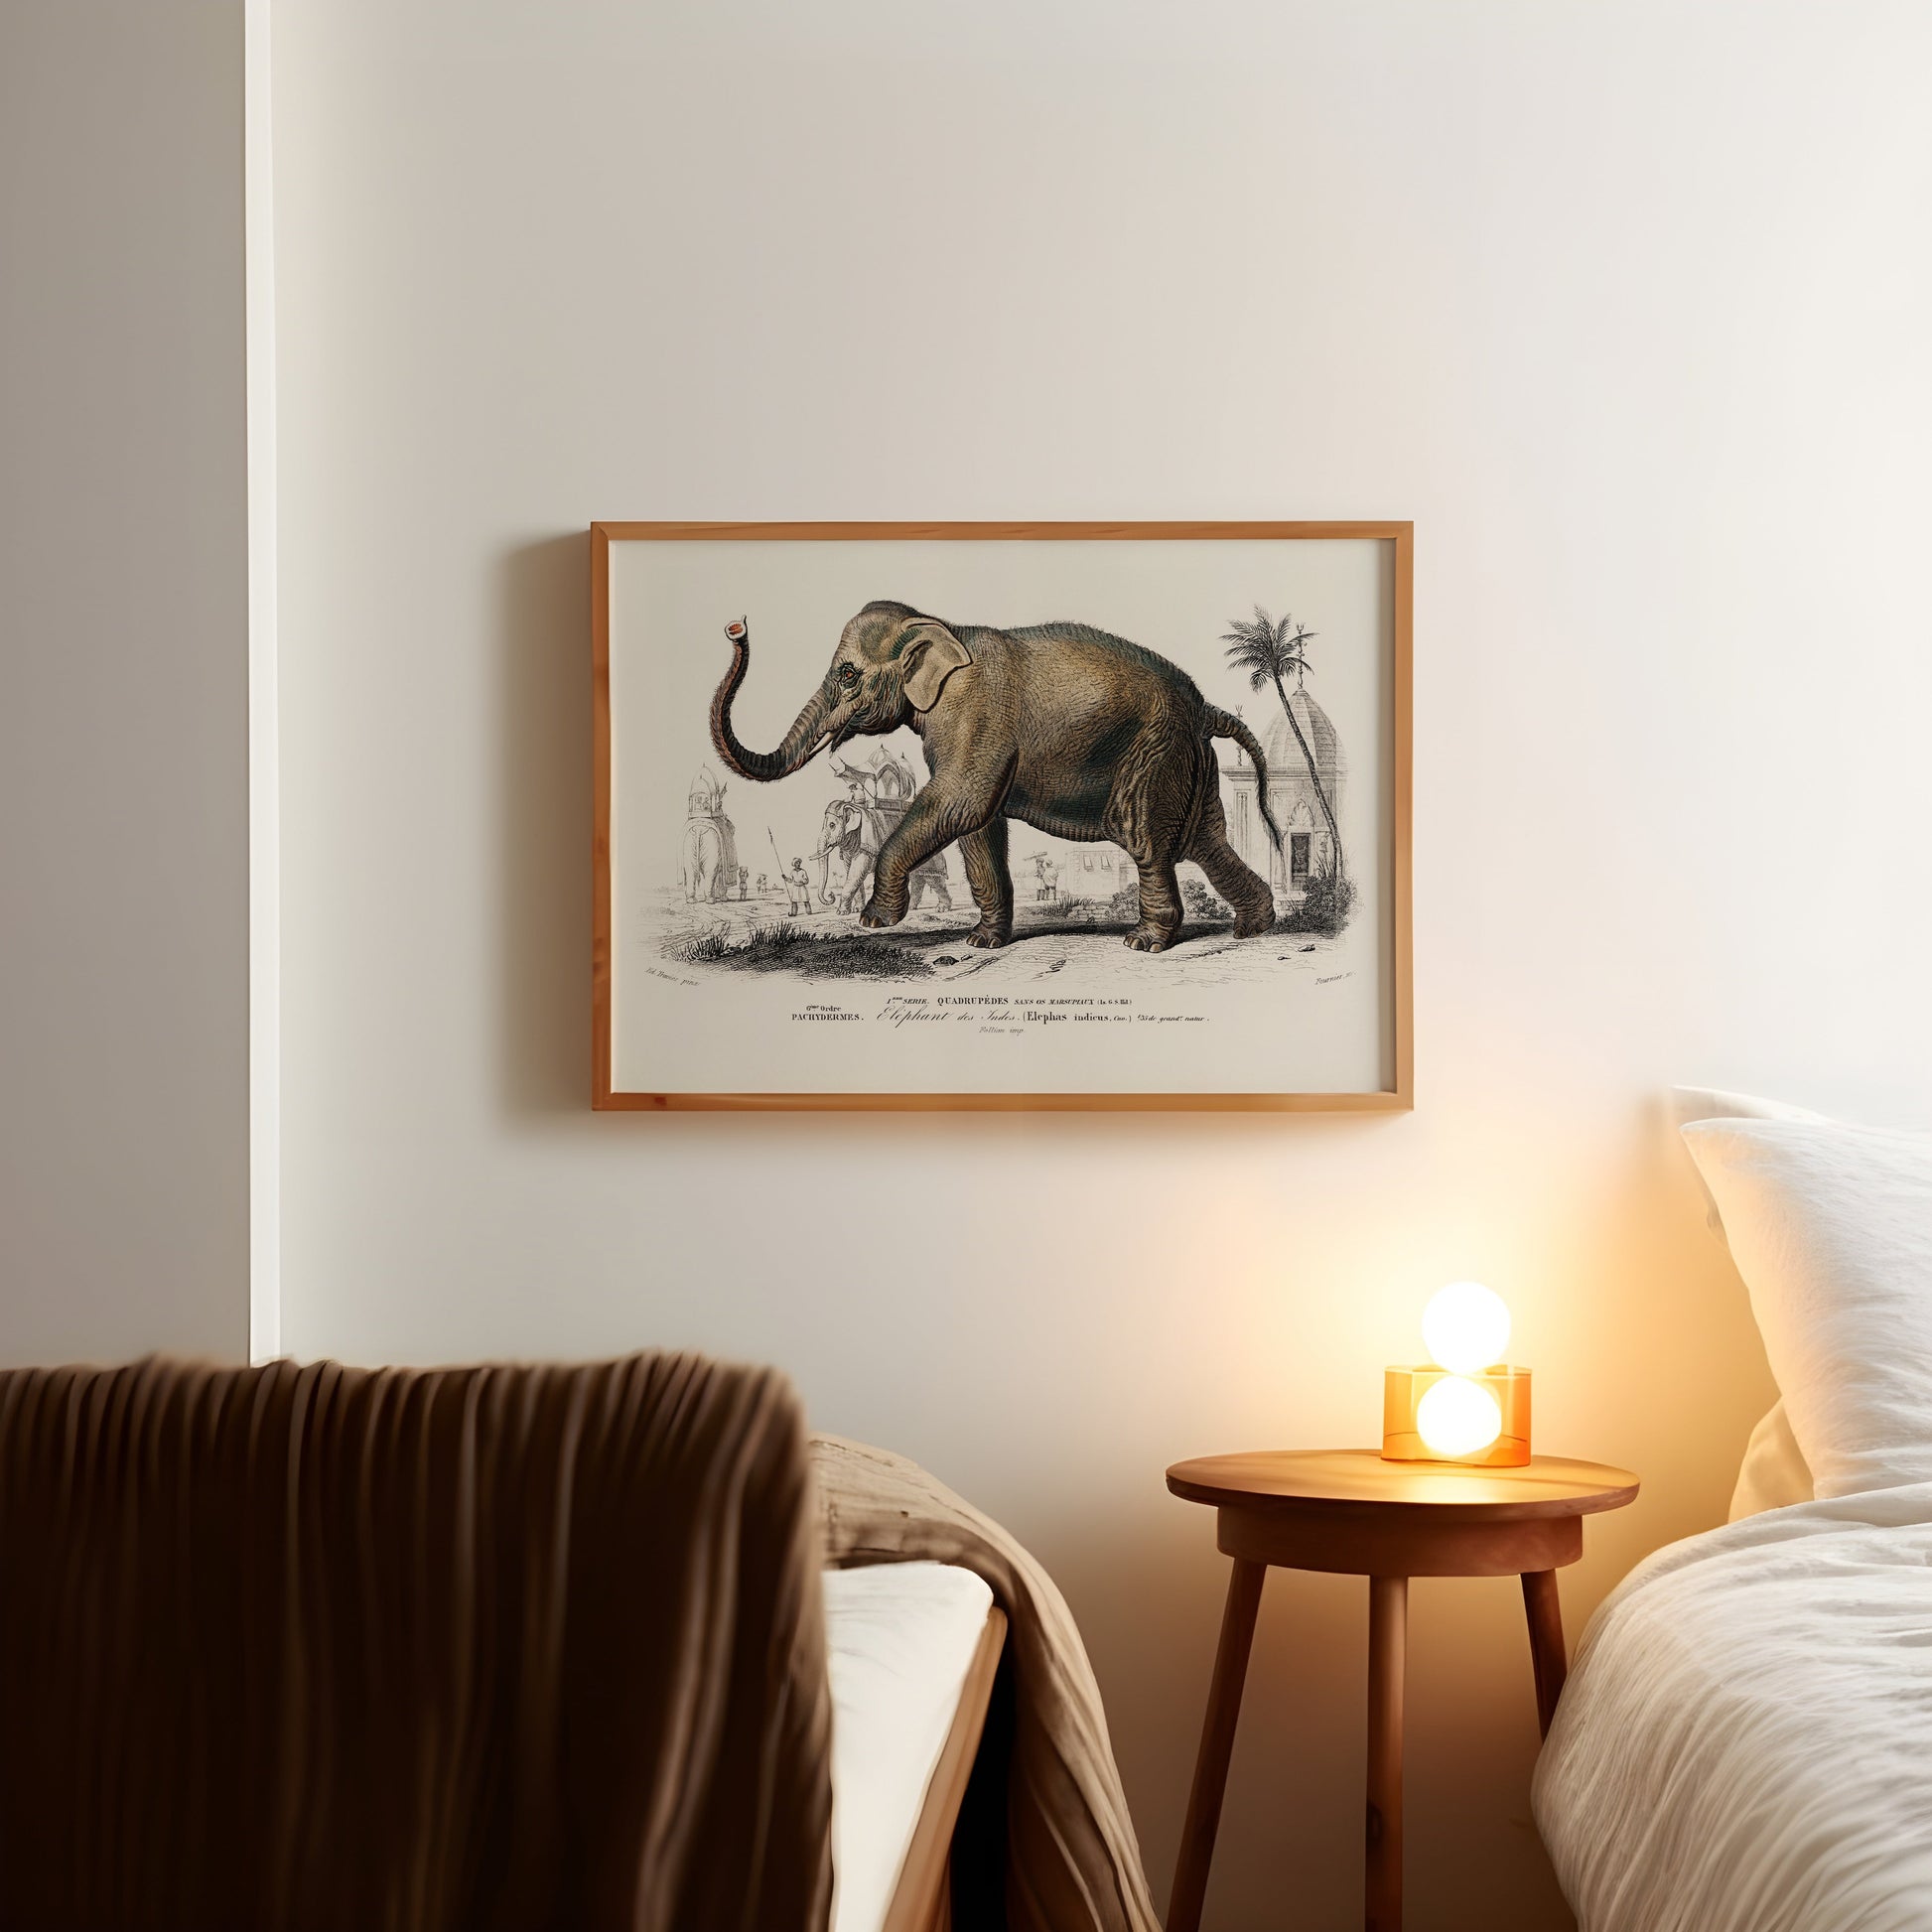 a picture of an elephant on a wall above a bed